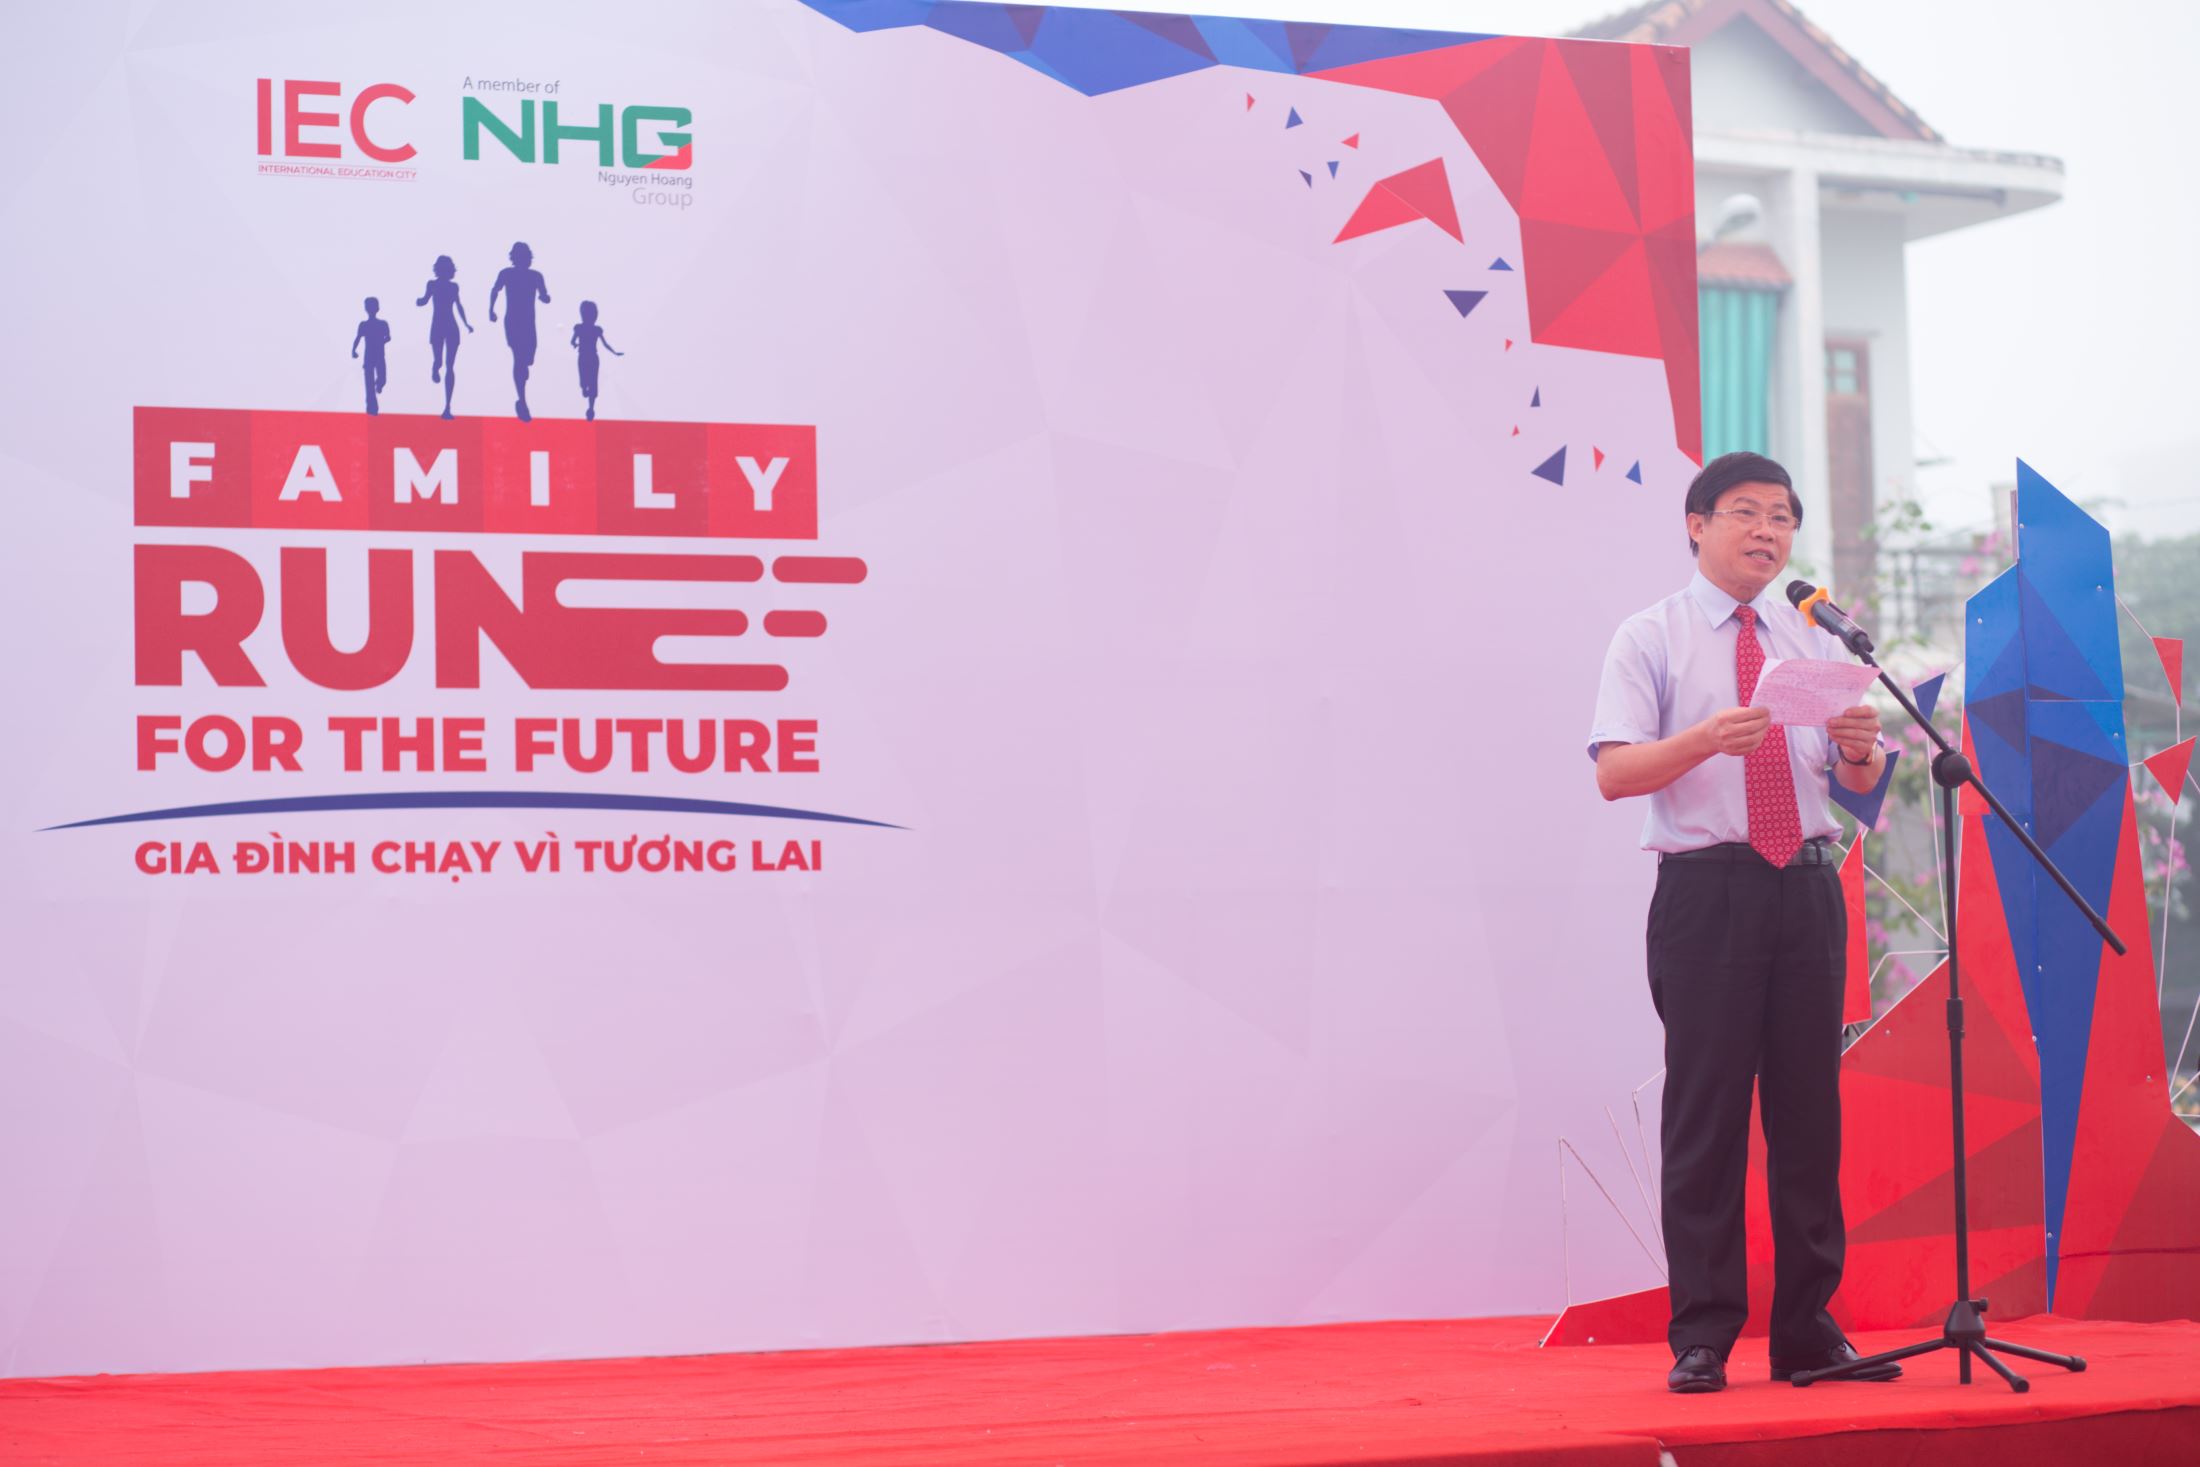 “Today we run together for the future, head to the better for young generation. The International Education – IEC Quang Ngai, where nourishes talents, is an ideal place for students to realize their studying and practicing dreams”, shared by Dr. Hung